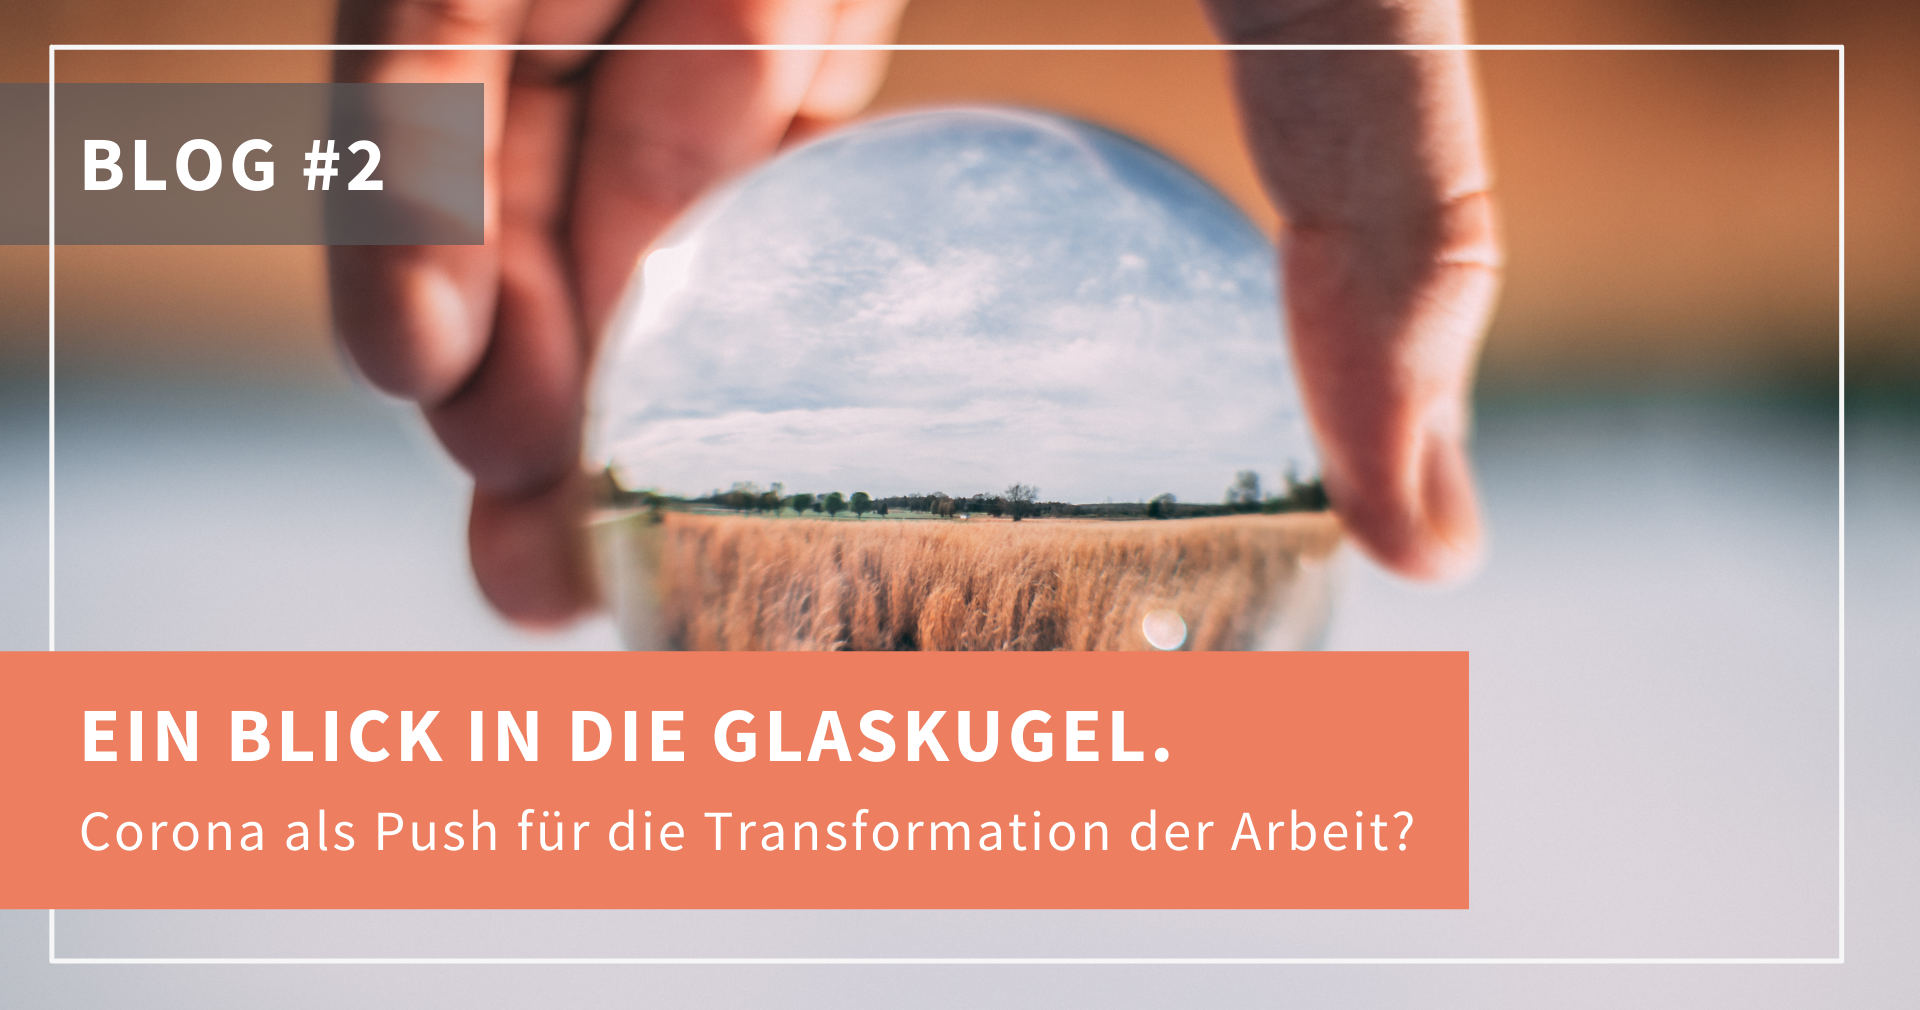 You are currently viewing Ein Blick in die Glaskugel.